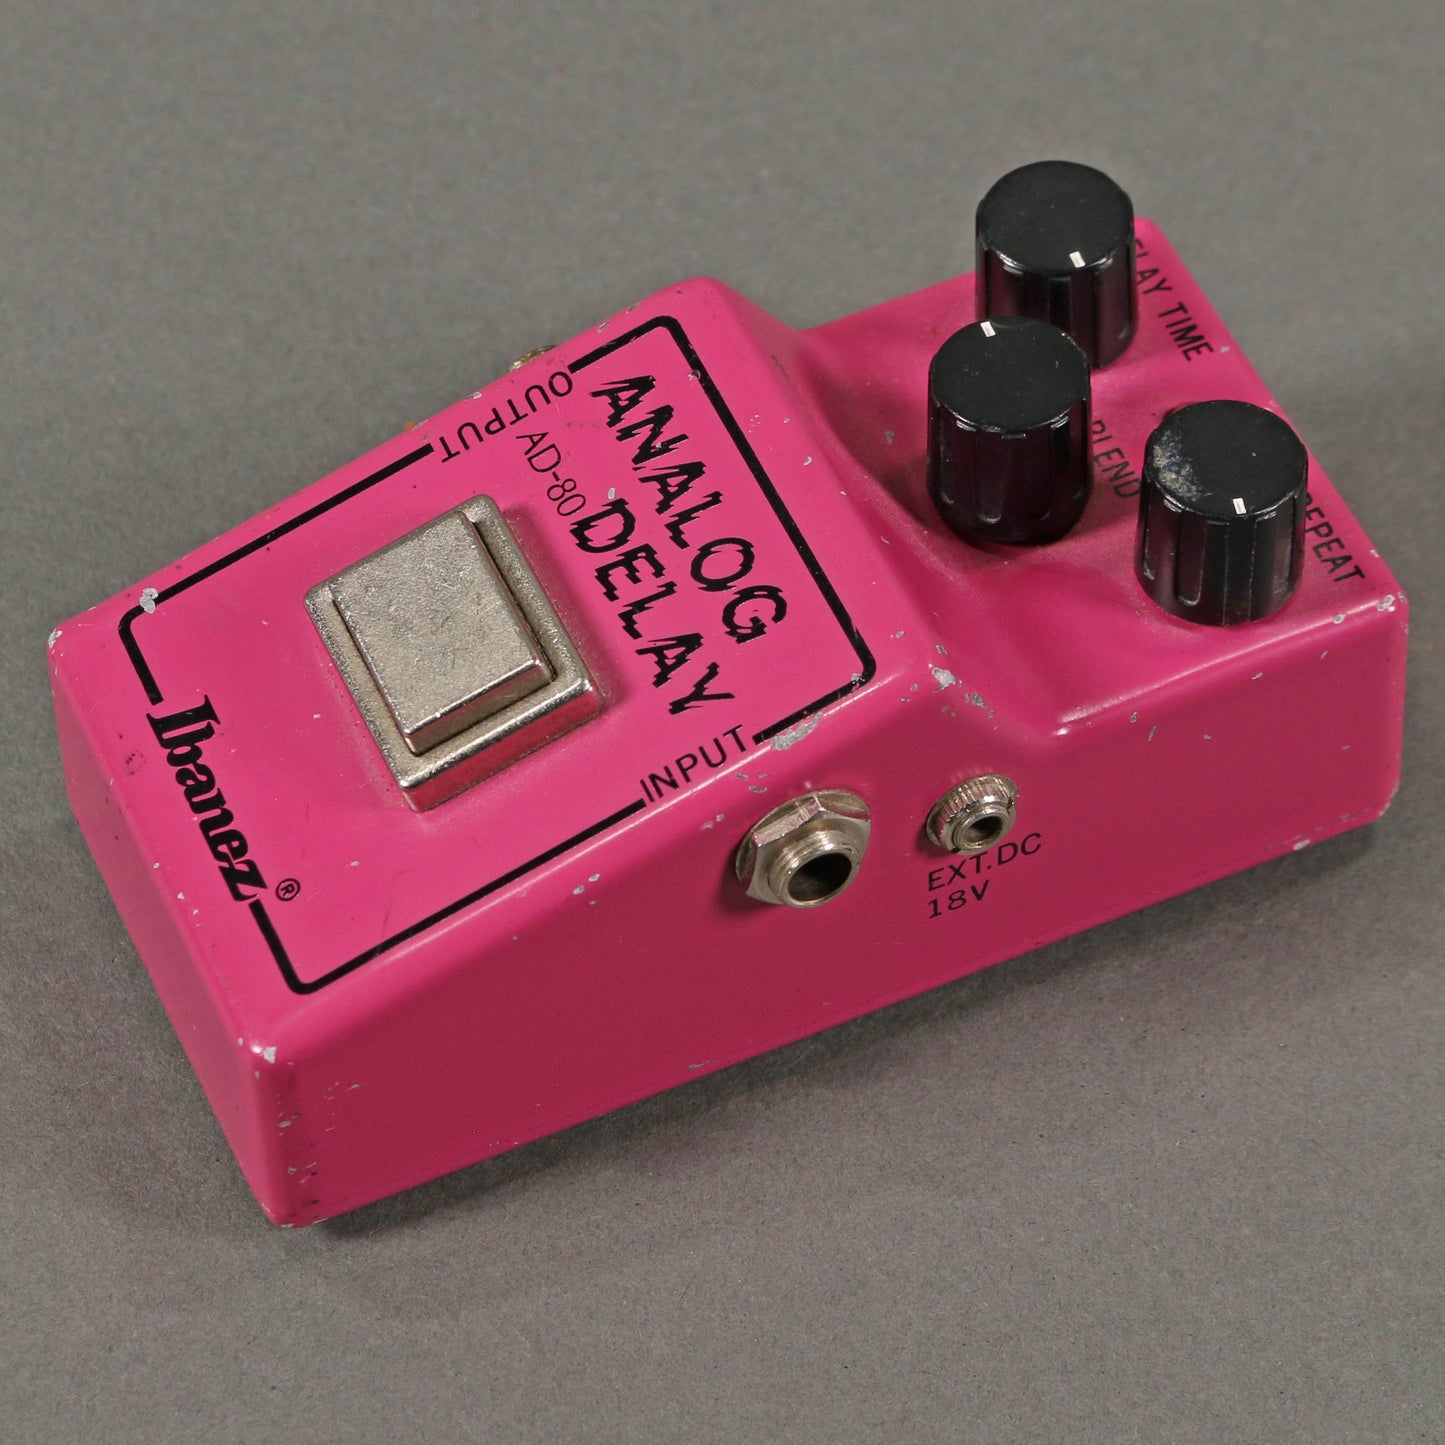 Ibanez AD-80 Analog Delay Made In Japan "R" Logo